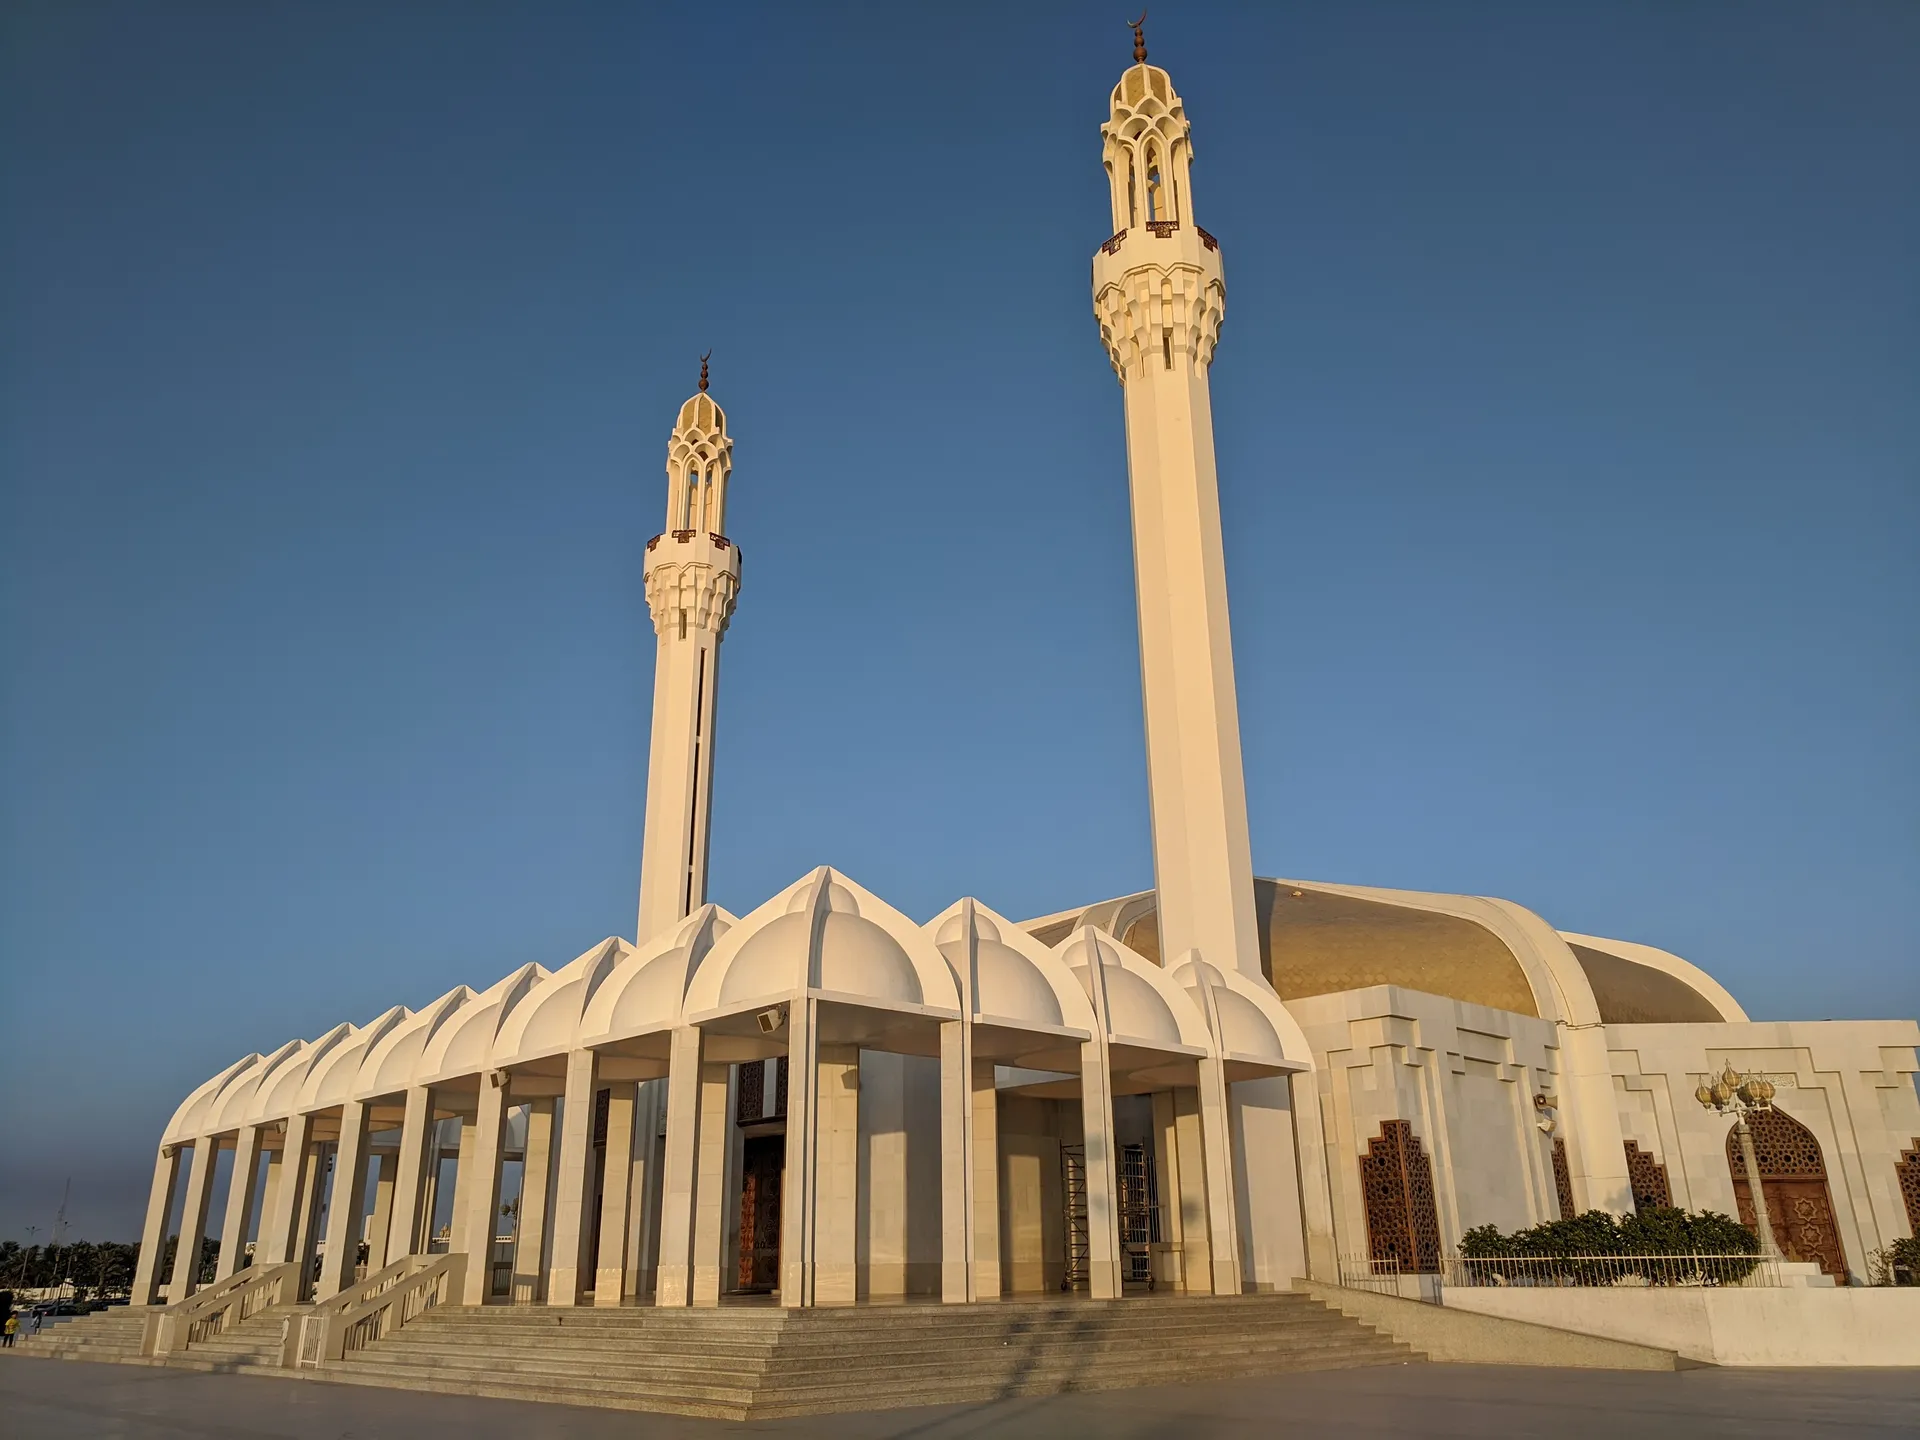 Hassan Enany Mosque